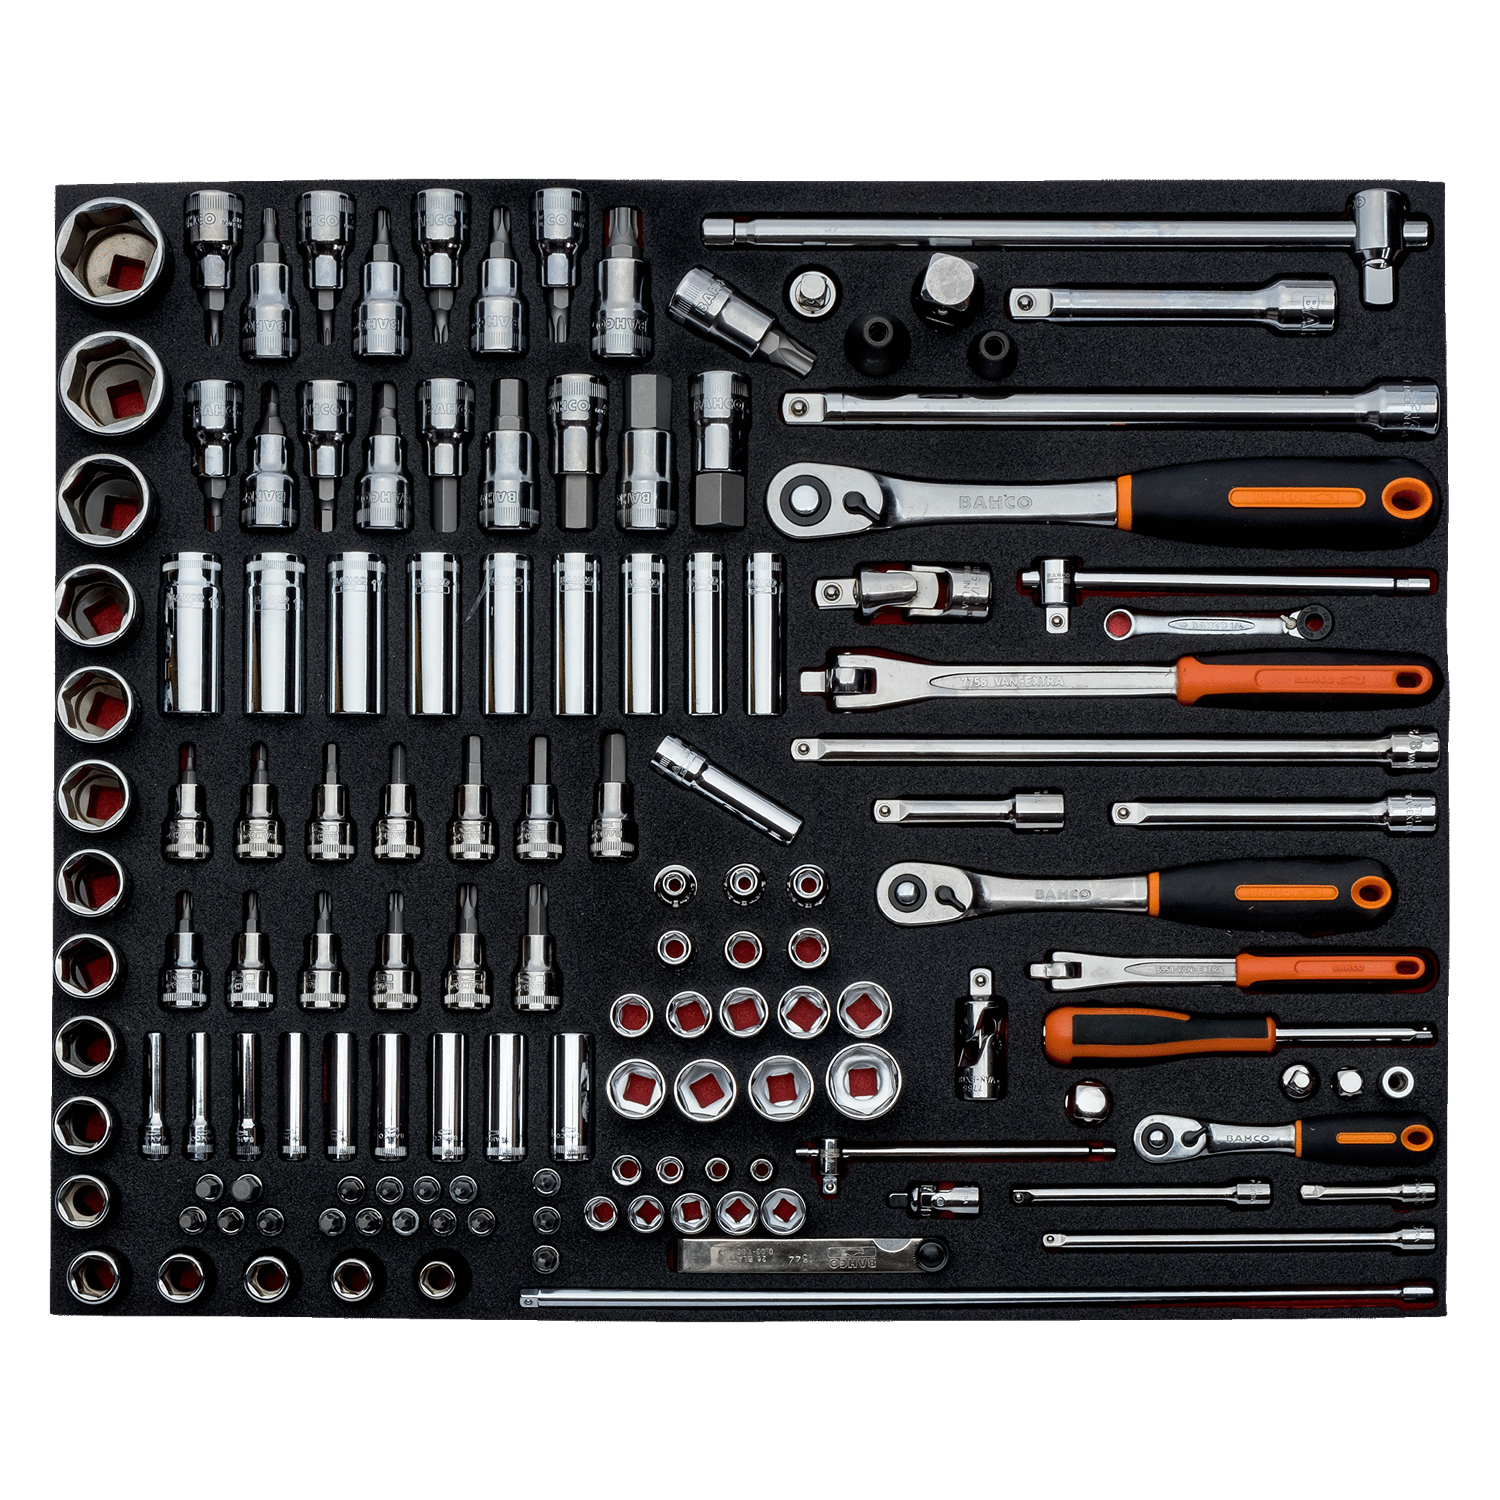 BAHCO FF1A08 Fit&Go 3/3 Foam Inlay 1/4 + 1/2 + 3/8 Ratchet Set - Premium Ratchet Set from BAHCO - Shop now at Yew Aik.